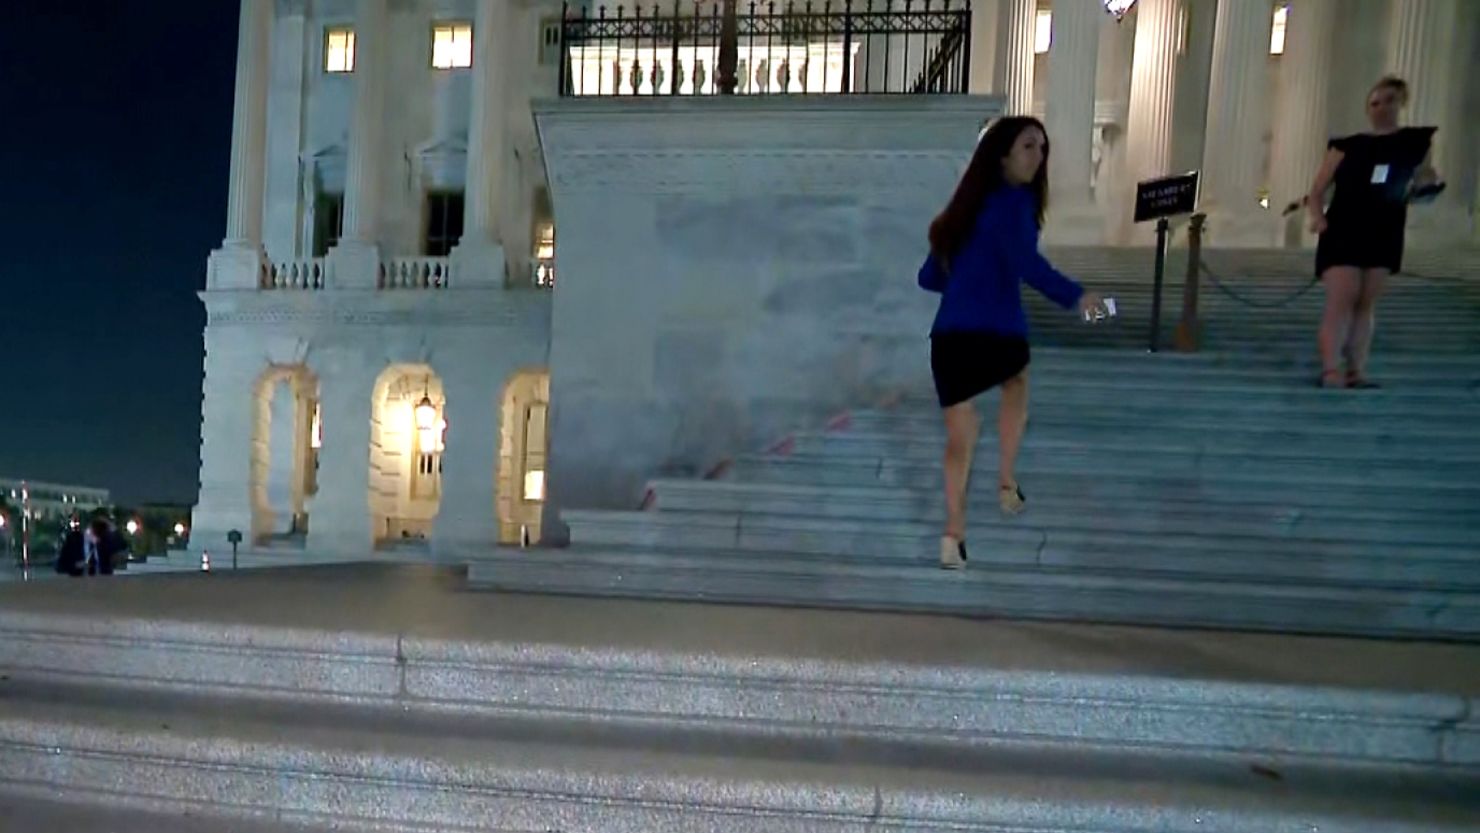 Boebert claims she missed a vote as a 'protest' -- but CNN's camera caught her running up the House steps as it ended.